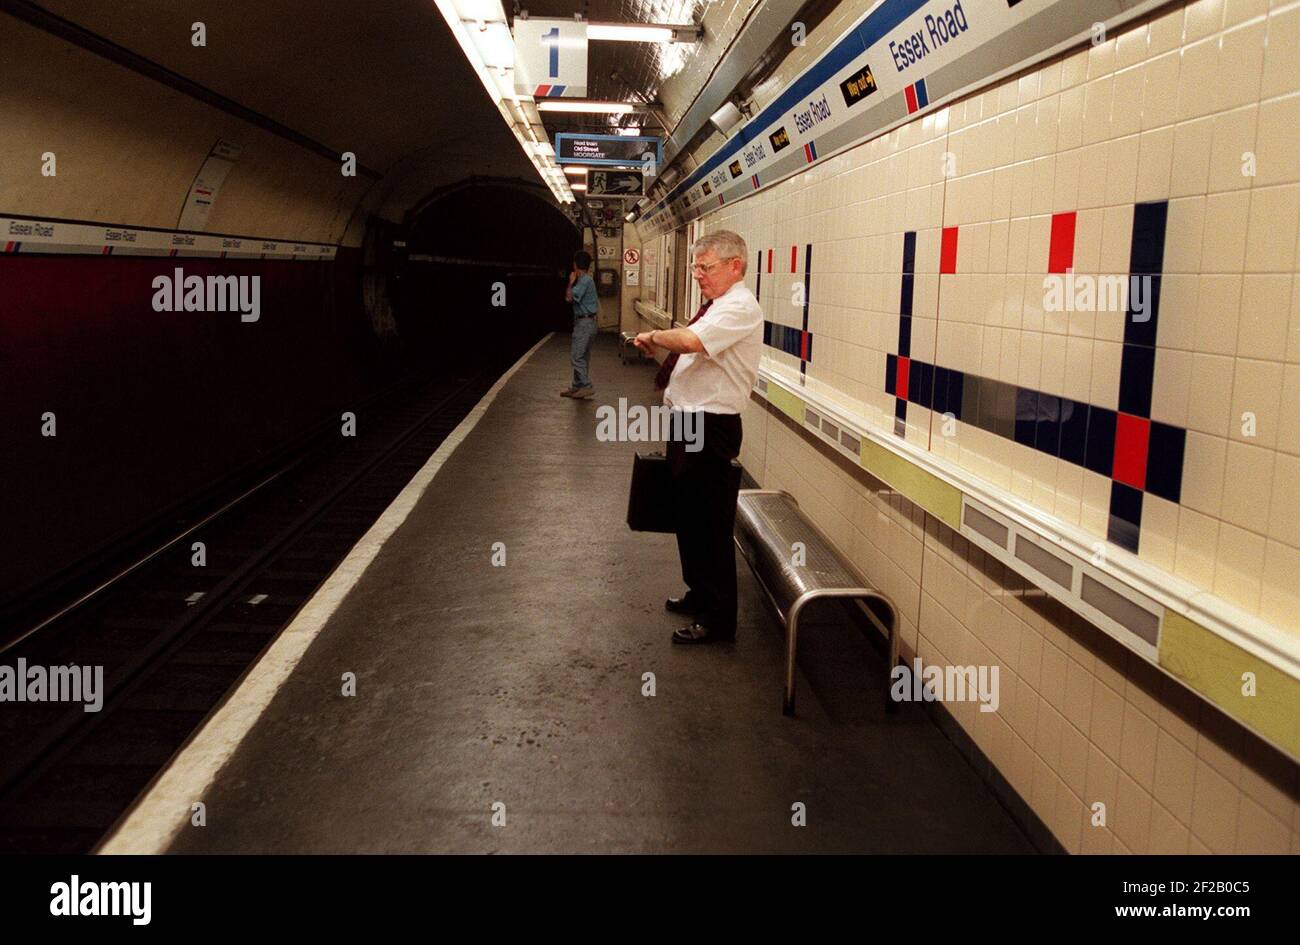 ESSEX ROAD STATION IS REGARDED AS PART OF THE UNDERGROUND. PASSENGER CHECKS HIS WATCH, WHILST WAITING ON THE PLATFORM Stock Photo